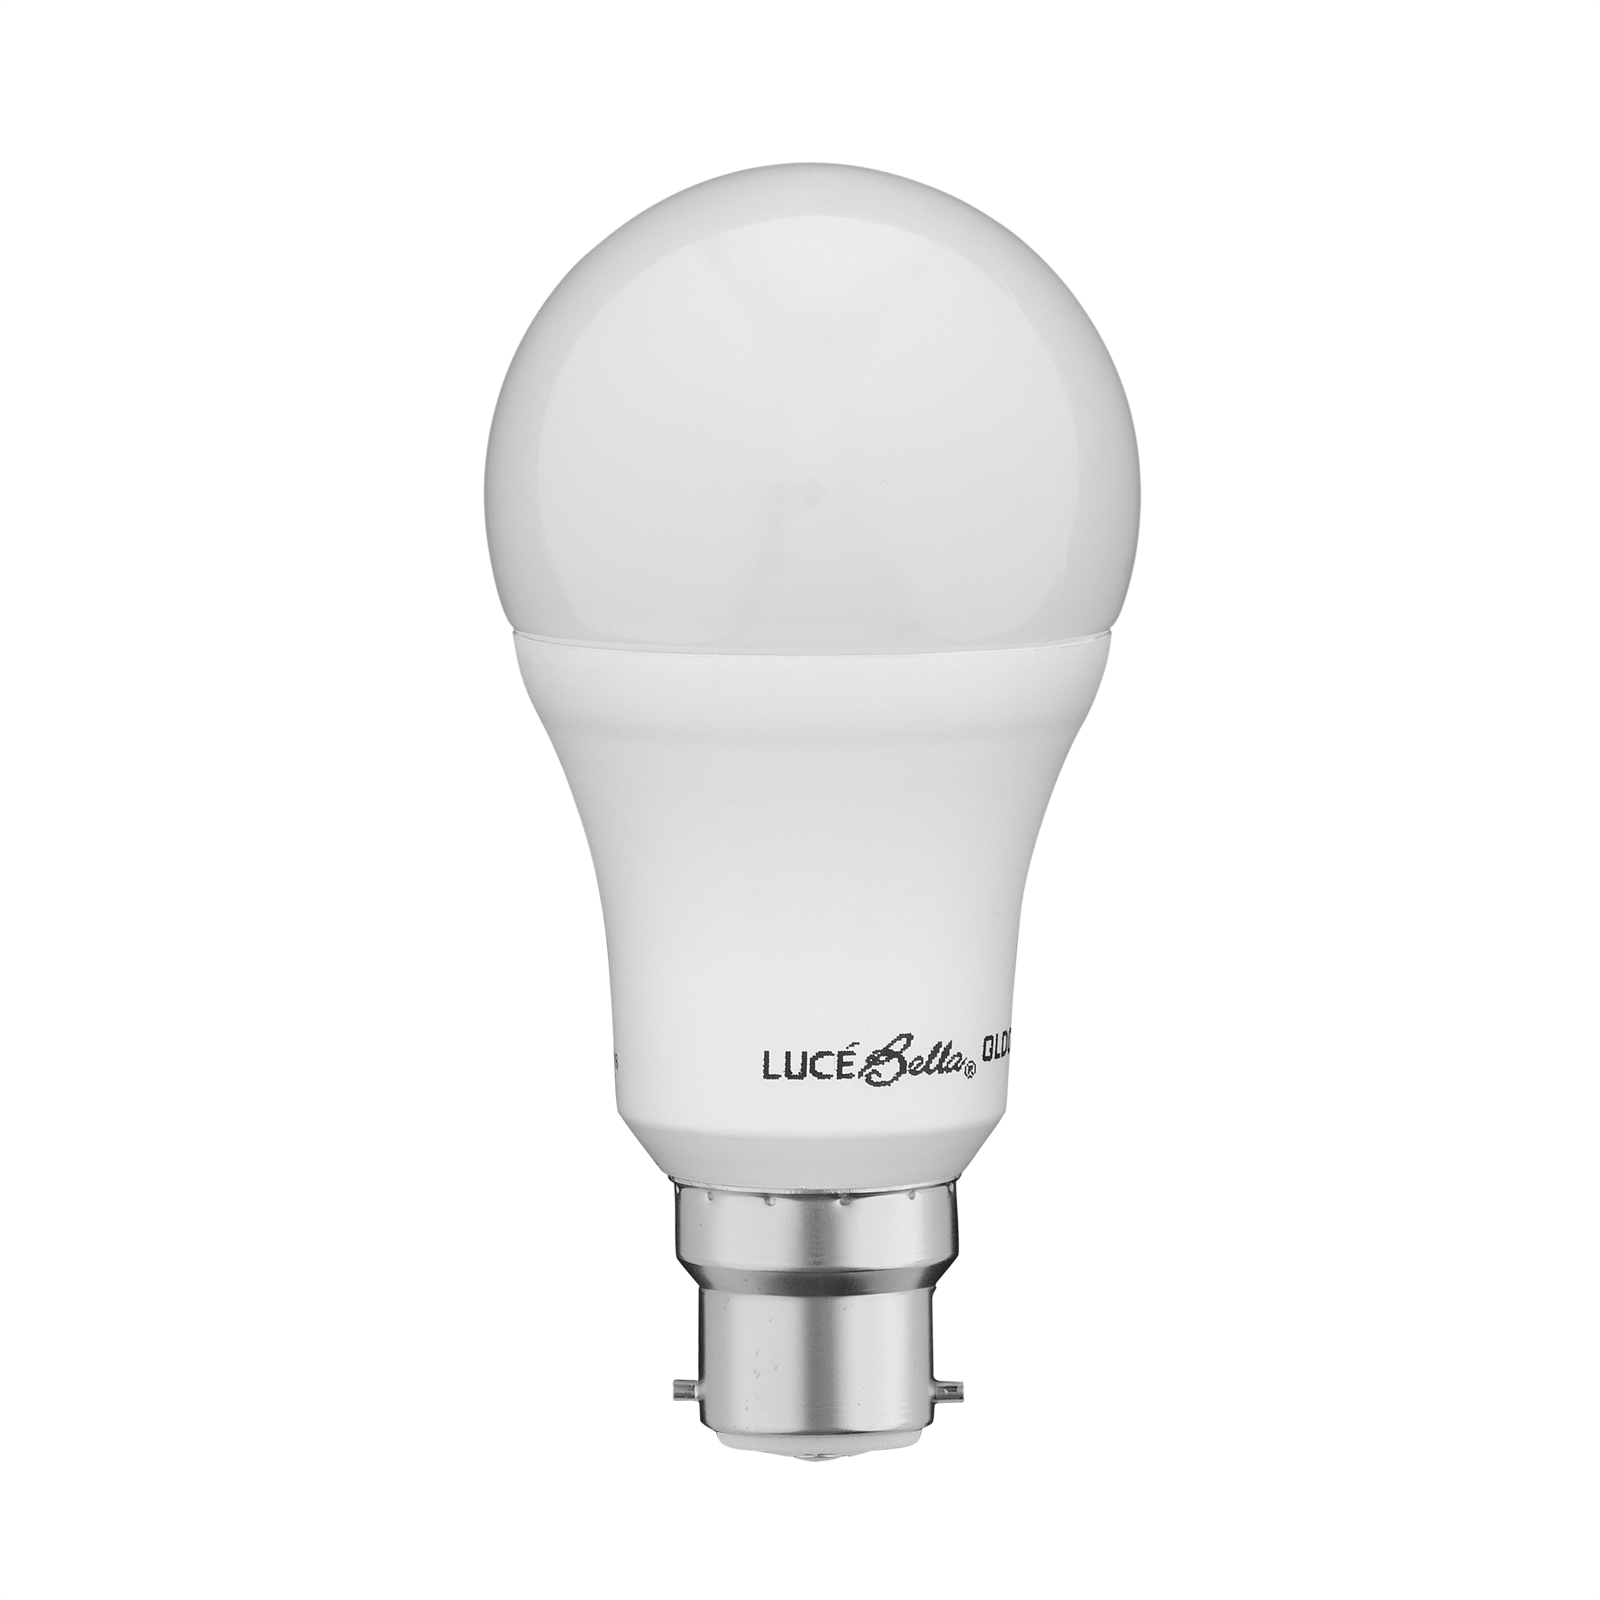 Luce Bella 10W Warm White Dimmable LED Globe - 2 Pack